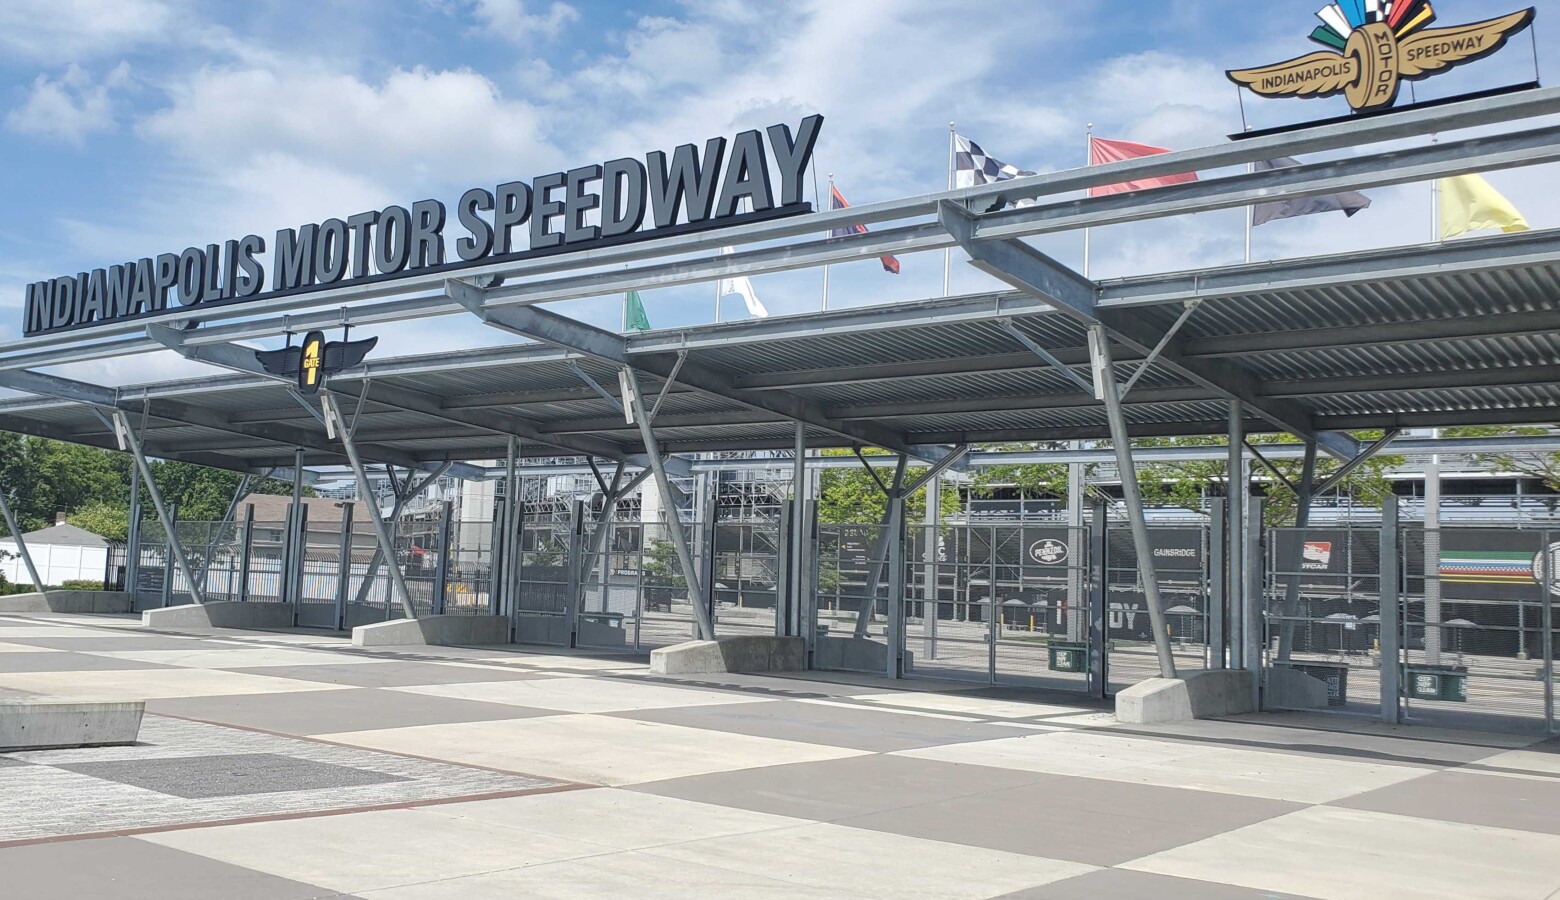 The first Indy Autonomous Challenge will take place at the Indianapolis Motor Speedway Oct. 23. (Samantha Horton/IPB News)